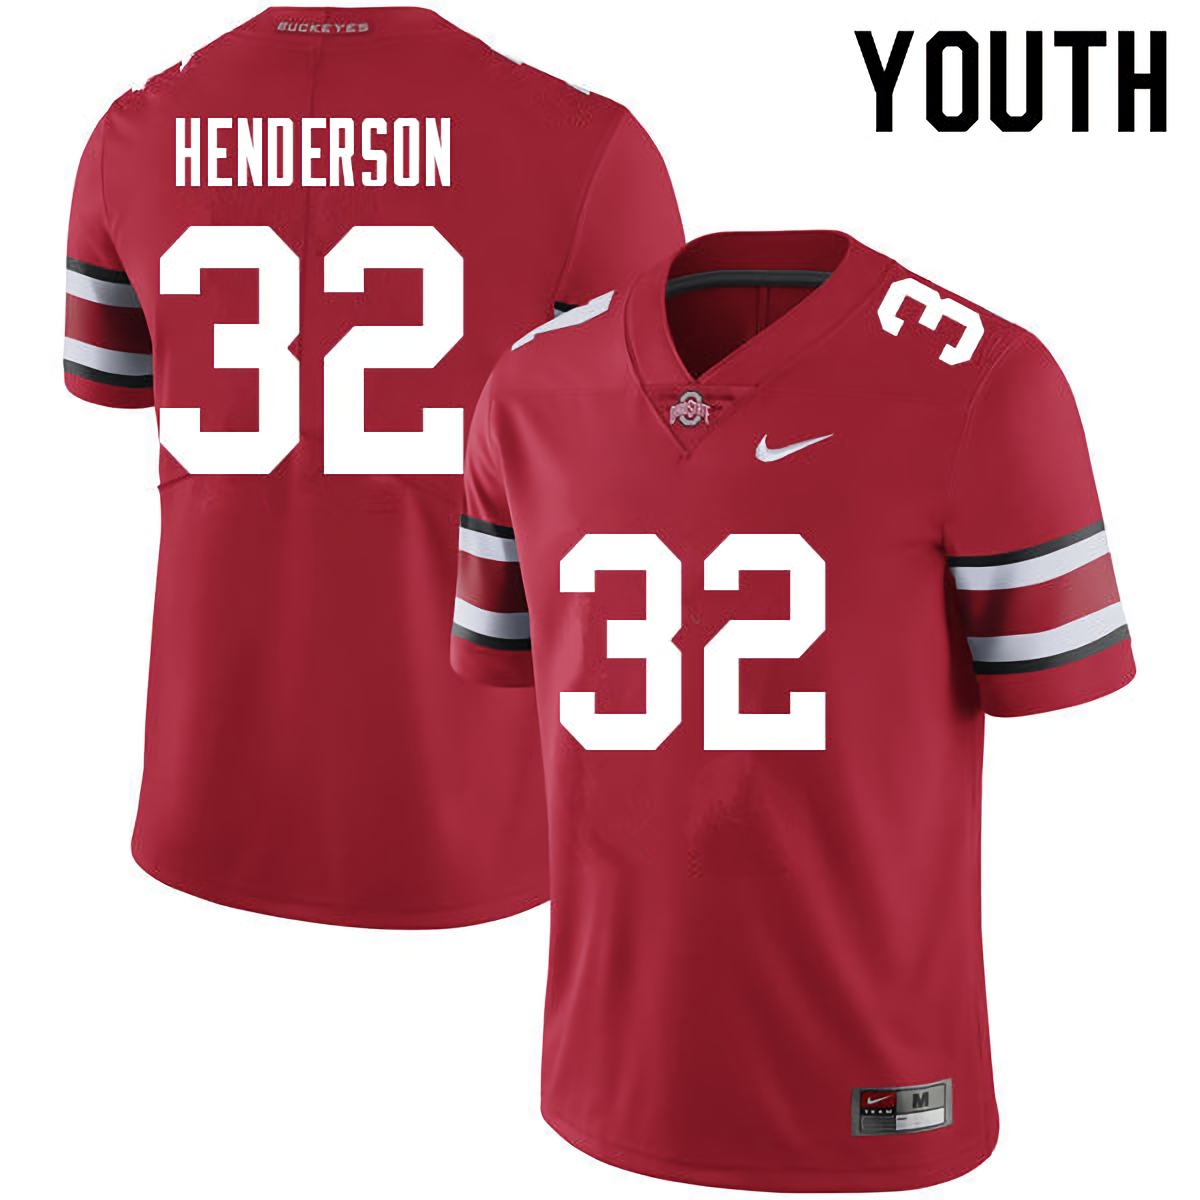 TreVeyon Henderson Ohio State Buckeyes Youth NCAA #32 Red College Stitched Football Jersey JKL4656HG